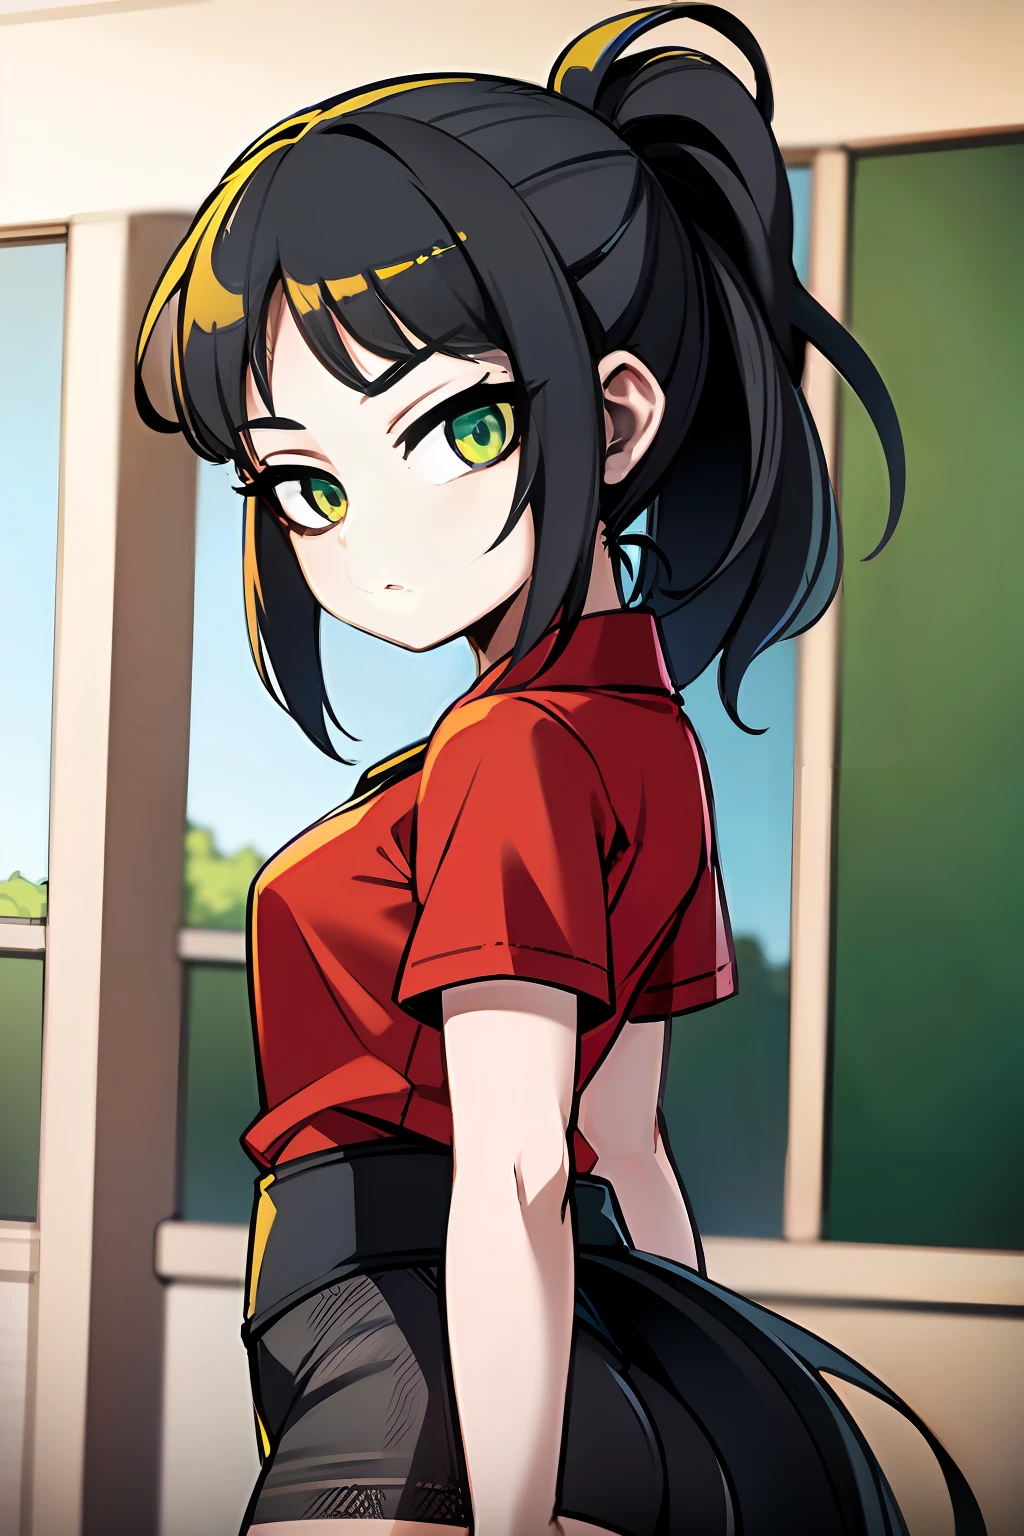 masterpiece, high quality, (anime), best quality, 1girl, very detailed eyes and face, loose red shirt, dynamic pose, dynamic light, face only, ponytail hair, (background: classroom), (((green eyes))), dark hair, ((((red shirt)))), ((yellow logo)), denim shorts, aquamarine shorts, ((excited)), black hair, yellow bun, stop, ((short long))), (gray tights), front view,  dark black hair, flat chest, (15 years), small figure, small thighs, (G logo), large size shirt, thin body, ponytail hair, ((dynamic background)), dark greenish hair, close view,